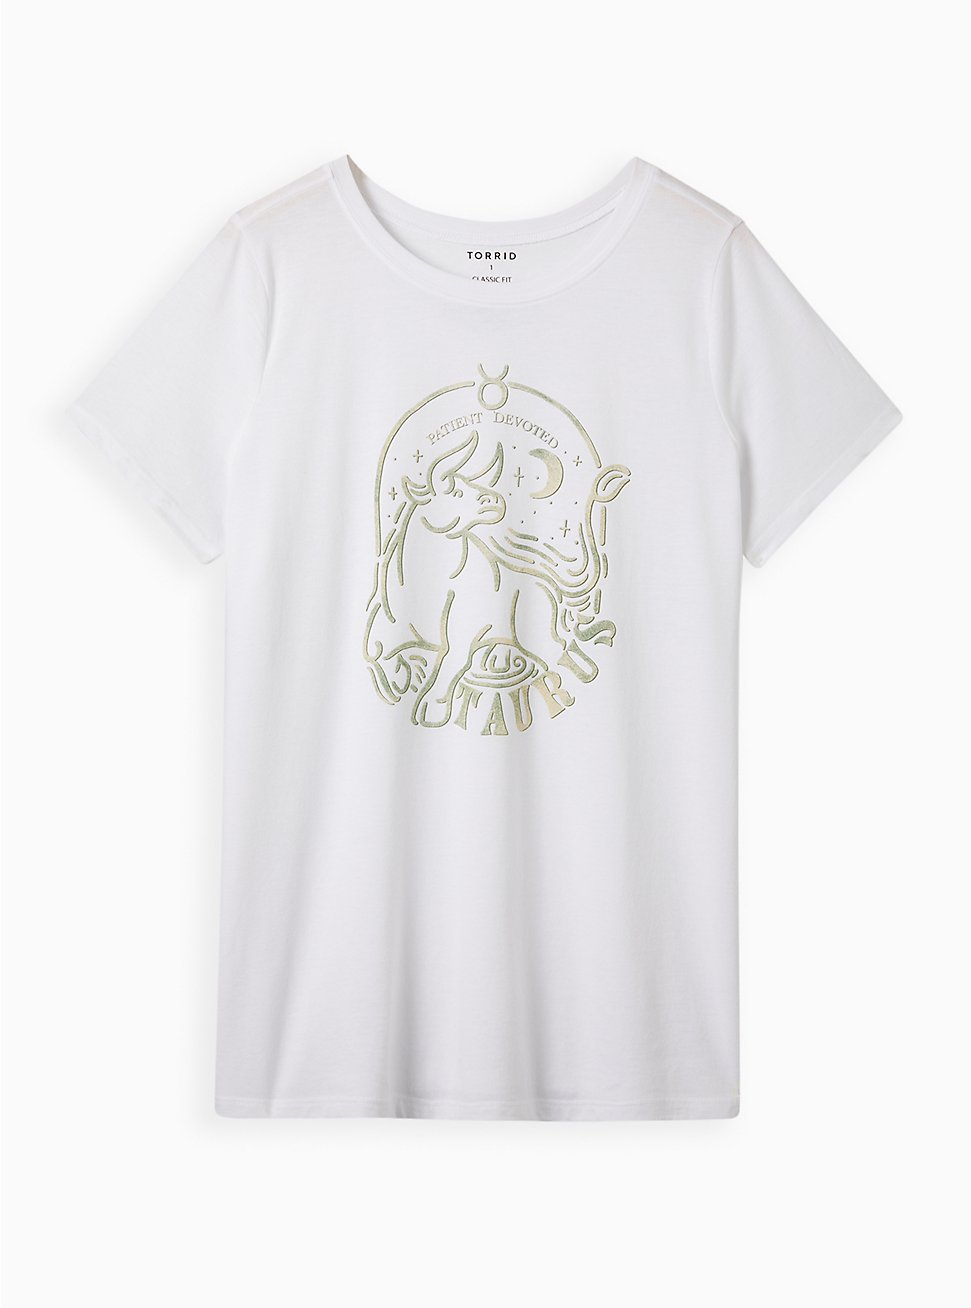 Plus Size Everyday Tee - Signature Jersey Astrology Taurus White, BRIGHT WHITE, hi-res